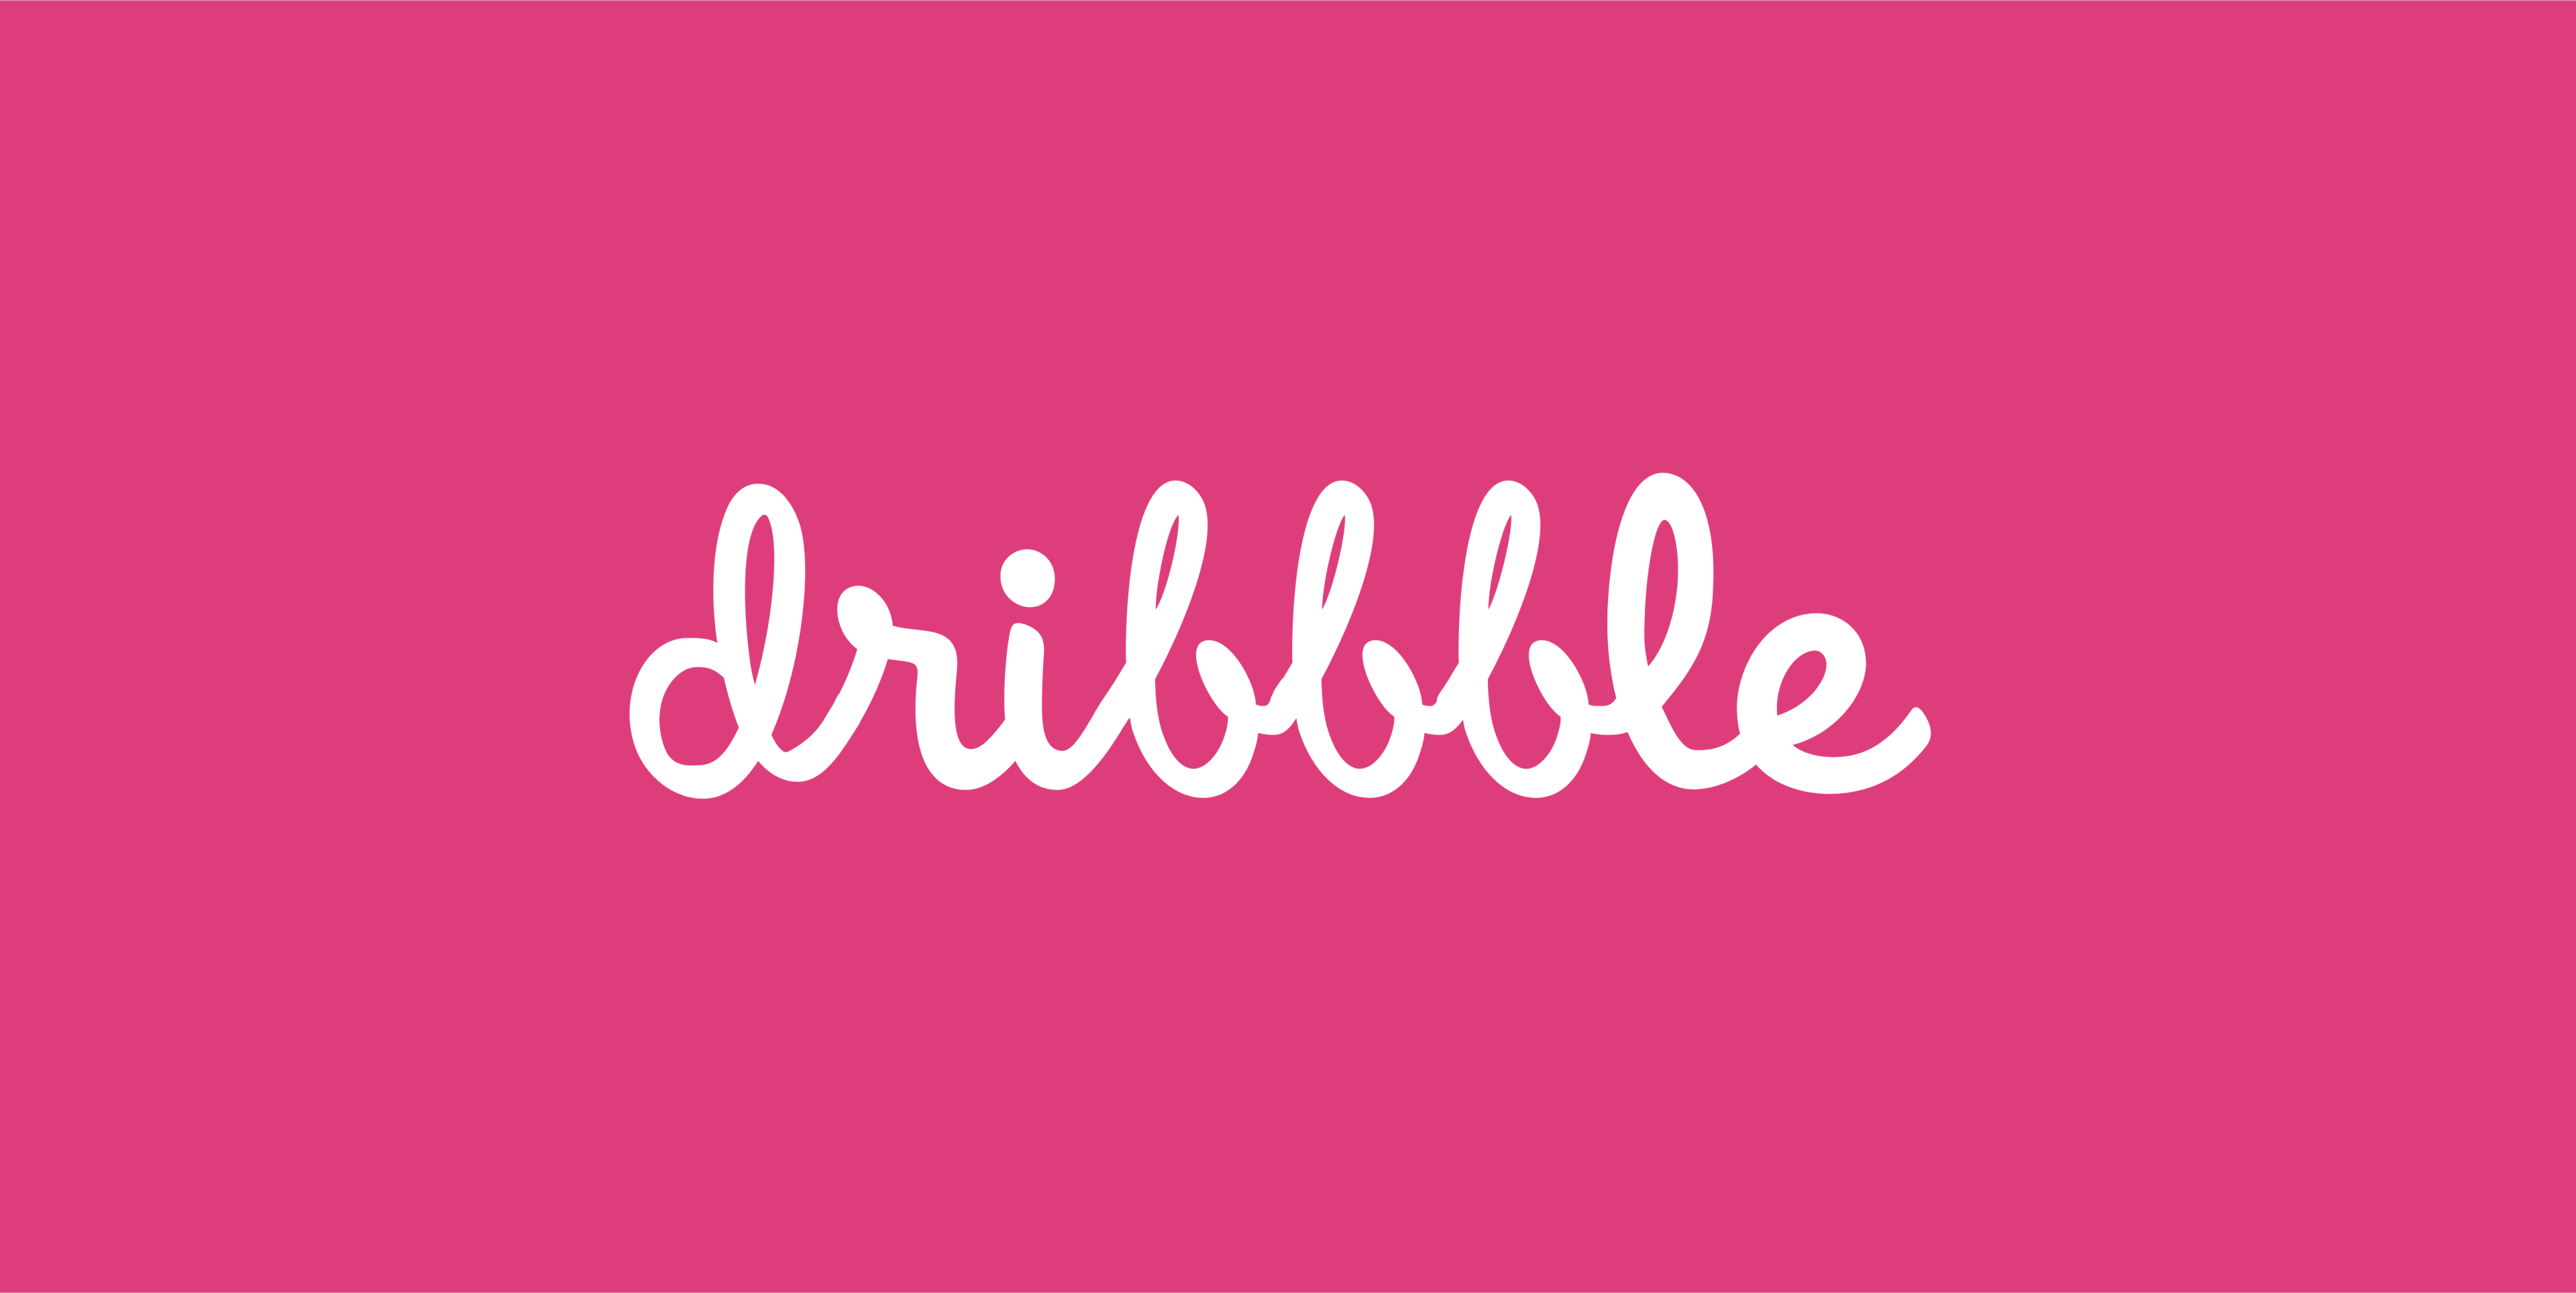 Online scheduling for Dribbble